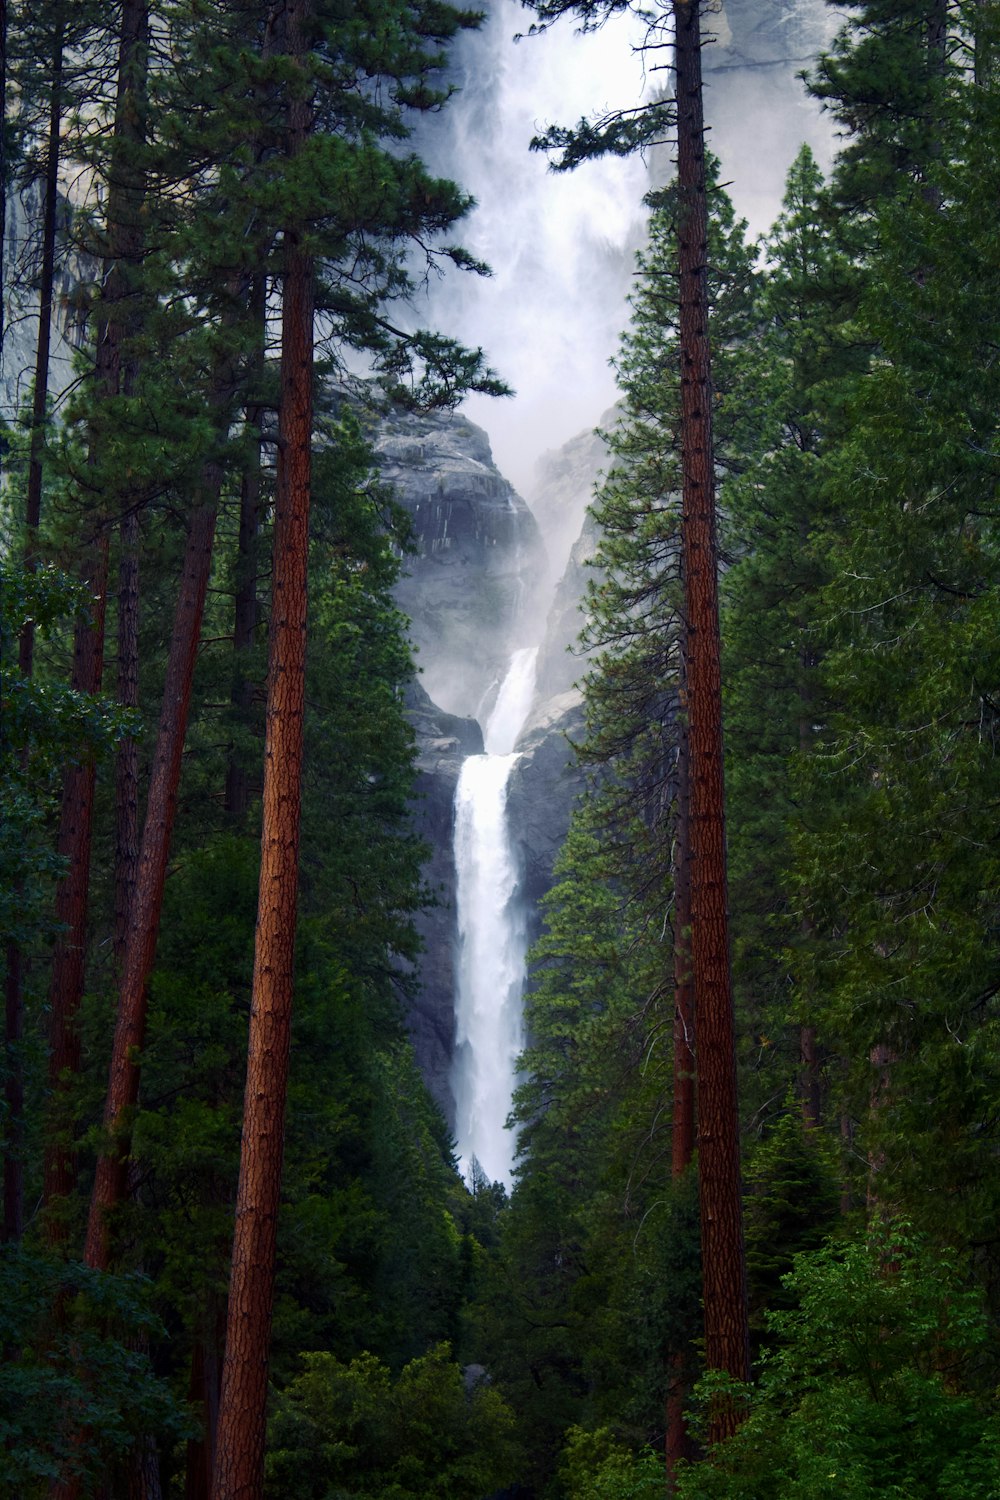 green and brown trees with water falls